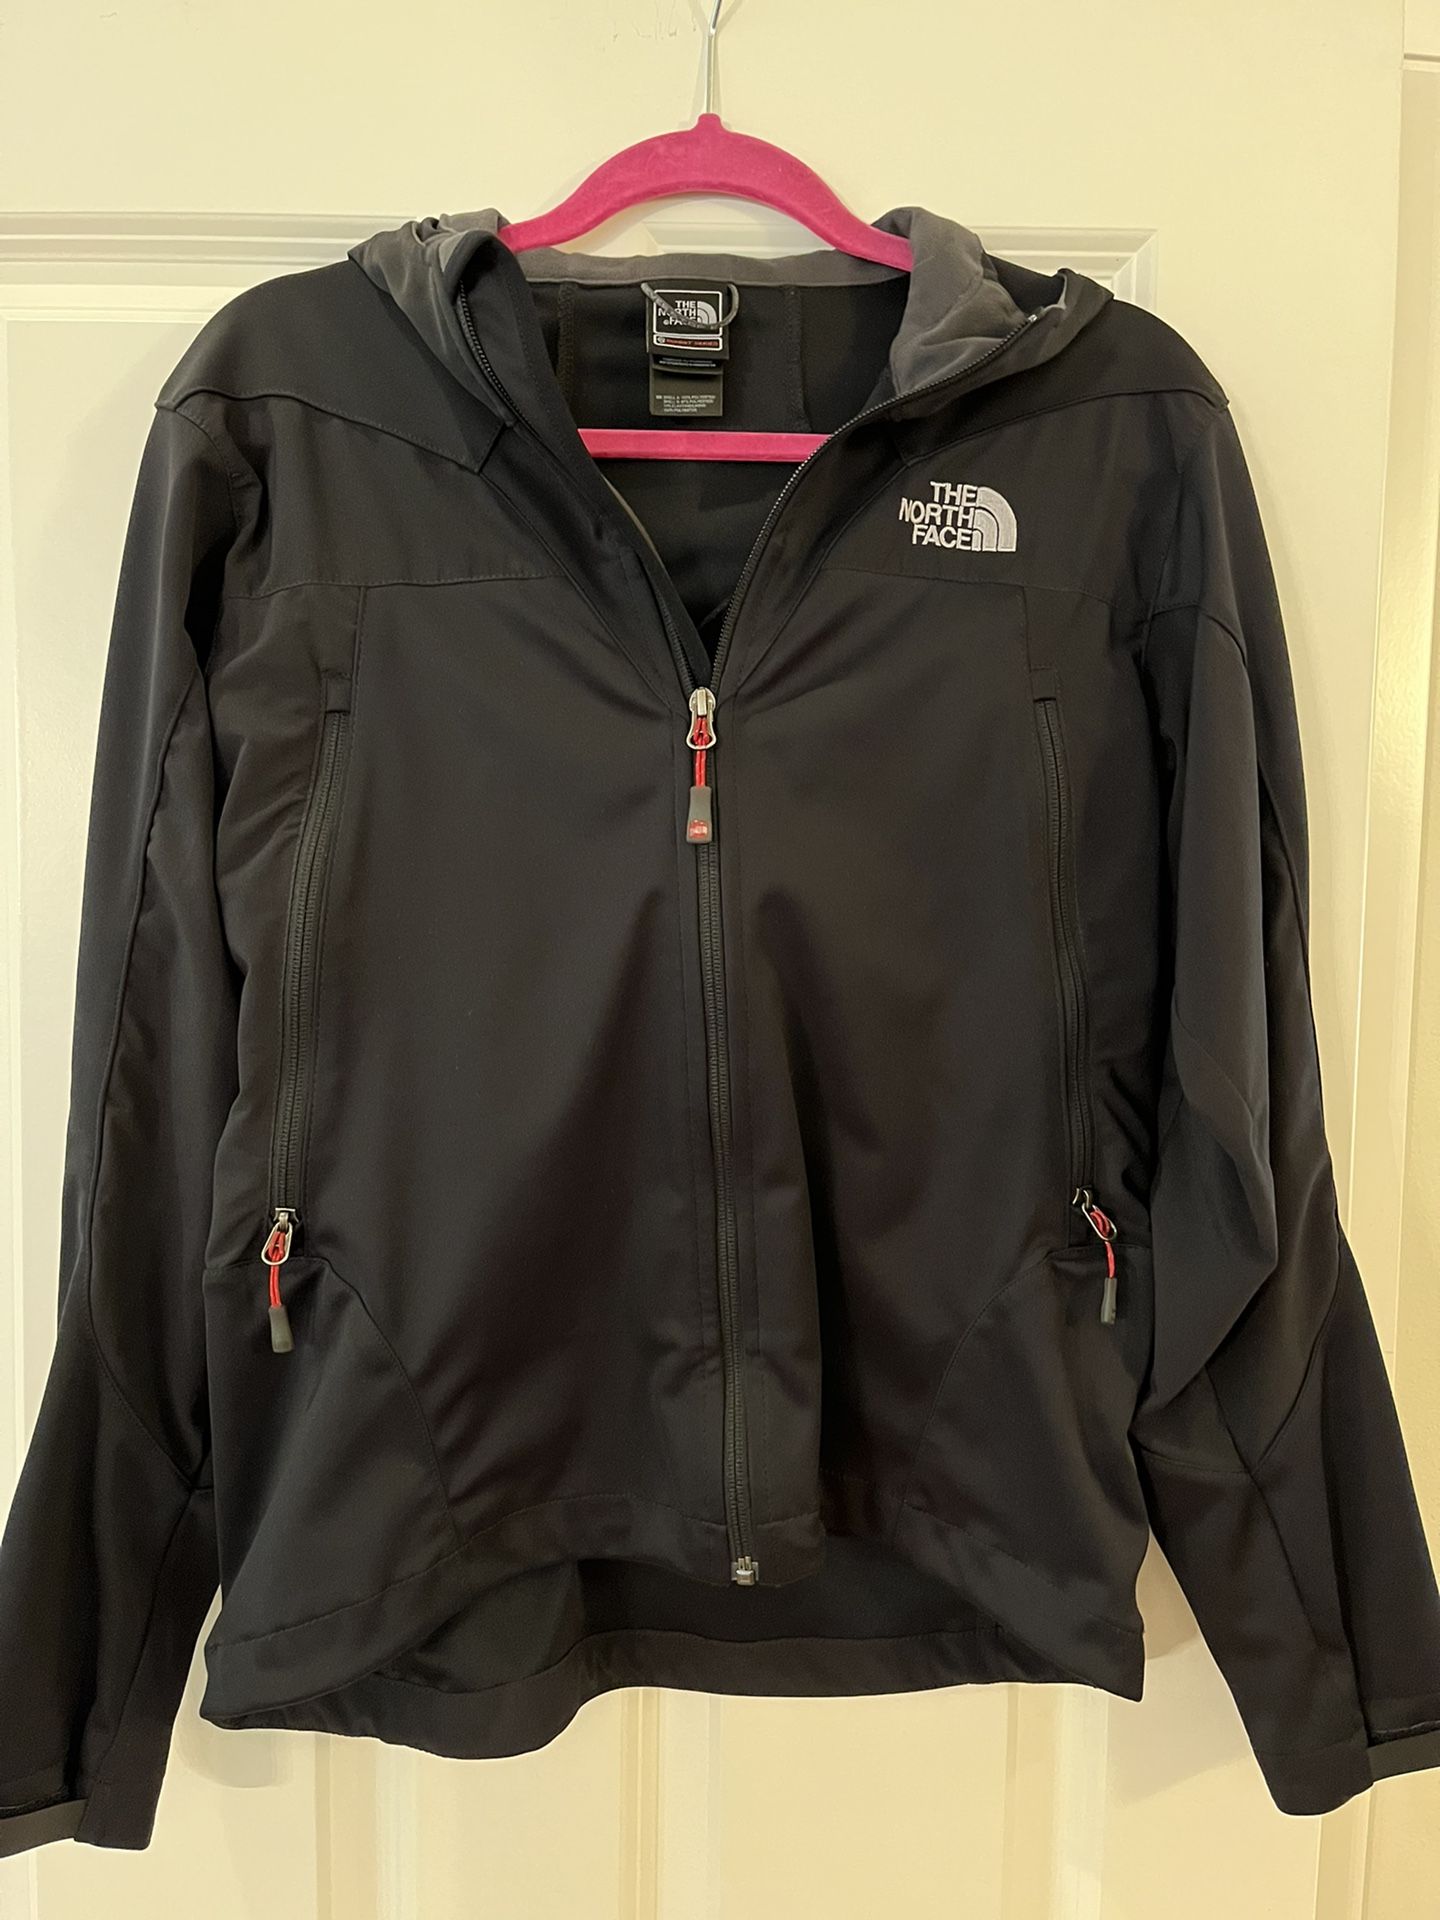 Northface for Sale in Bothell, WA - OfferUp